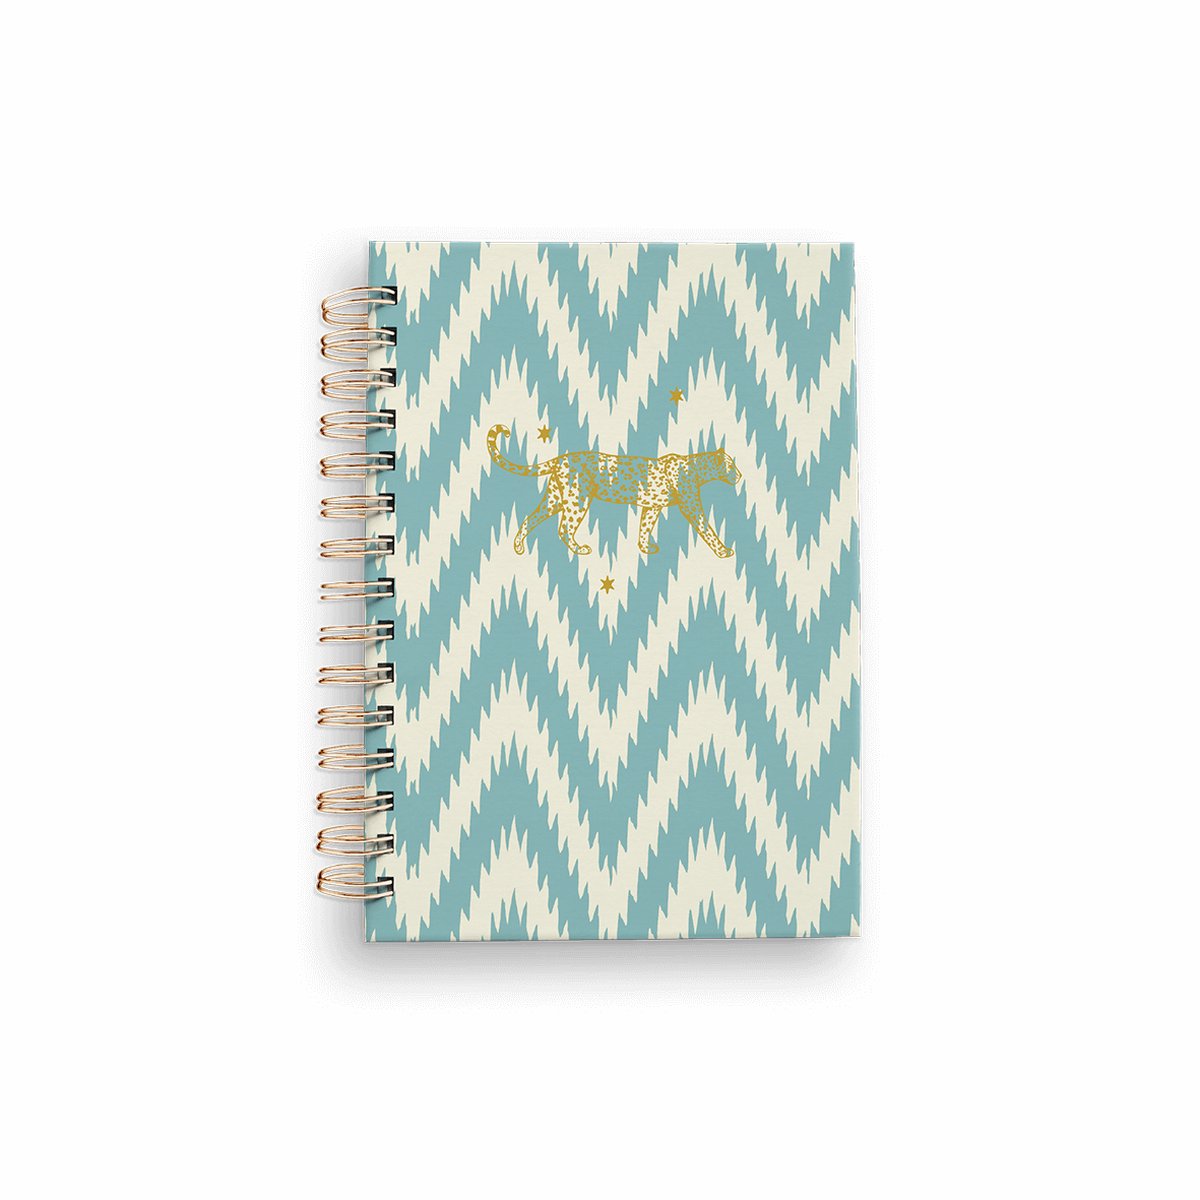 Creative Lab Amsterdam stationery - Notitieboek - Ikat Blue design - Wire-O - A6 formaat